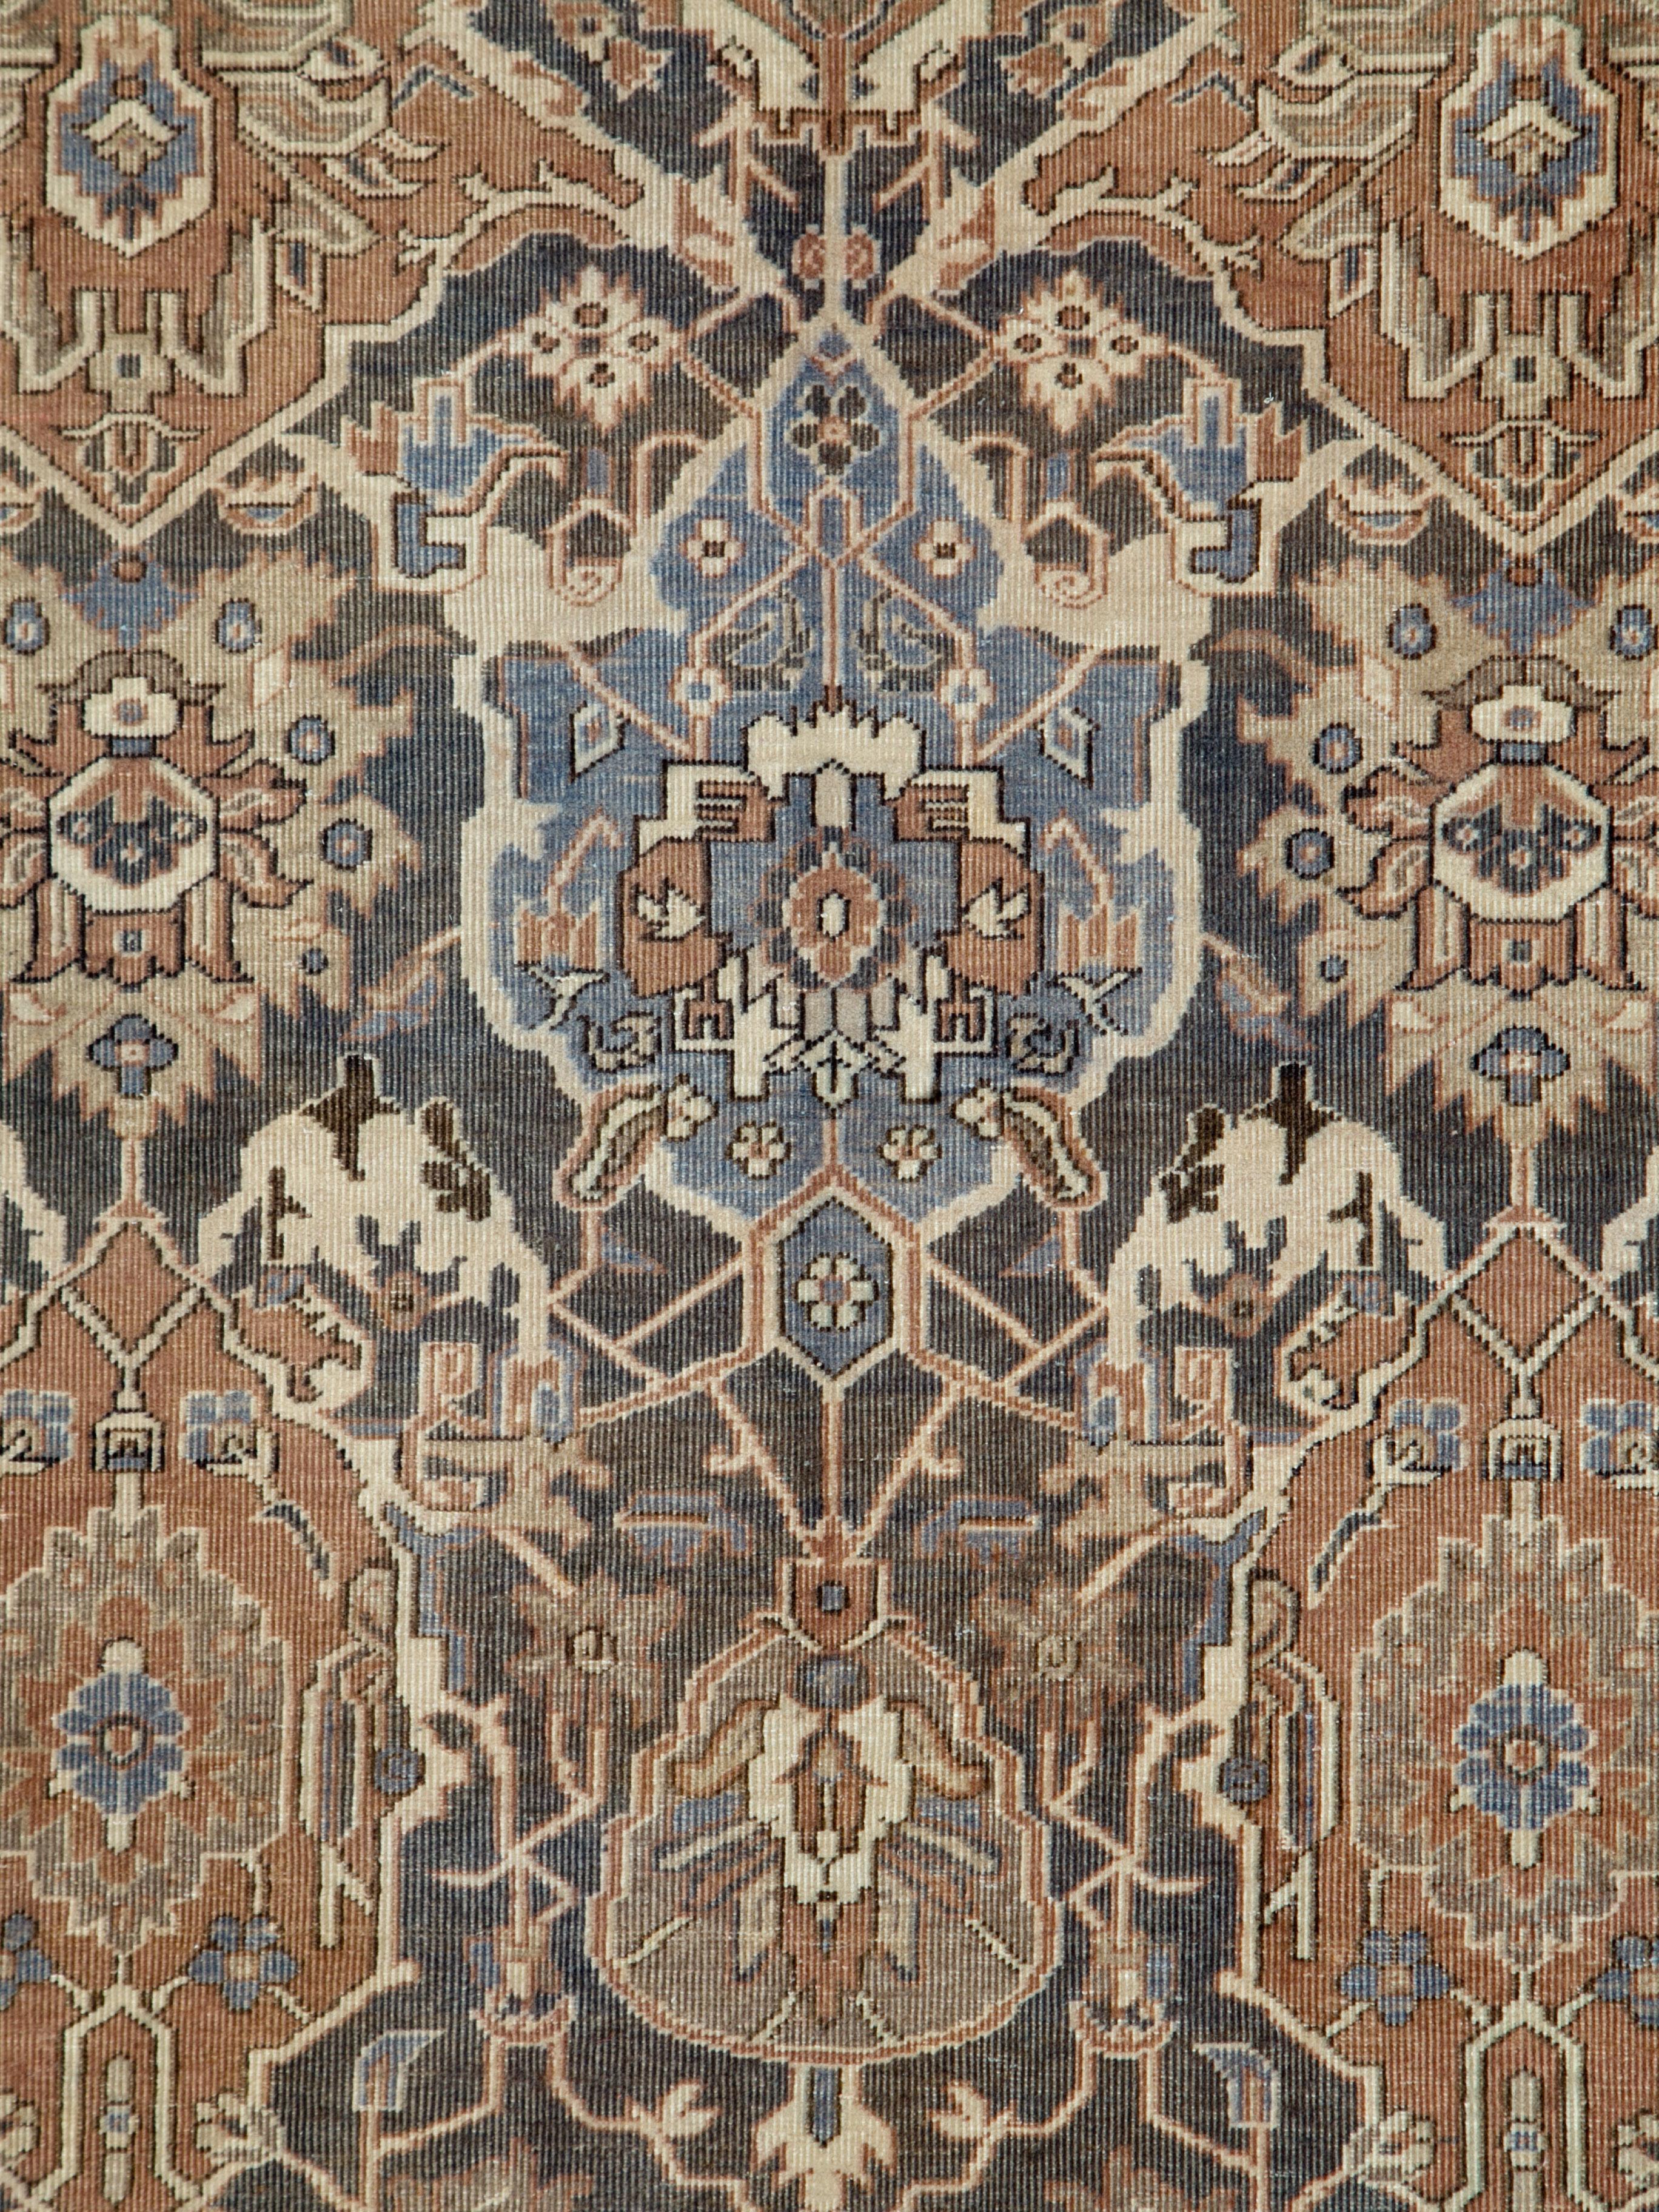 A vintage Turkish Sivas rug from the mid-20th century.

Measures: 7' 10